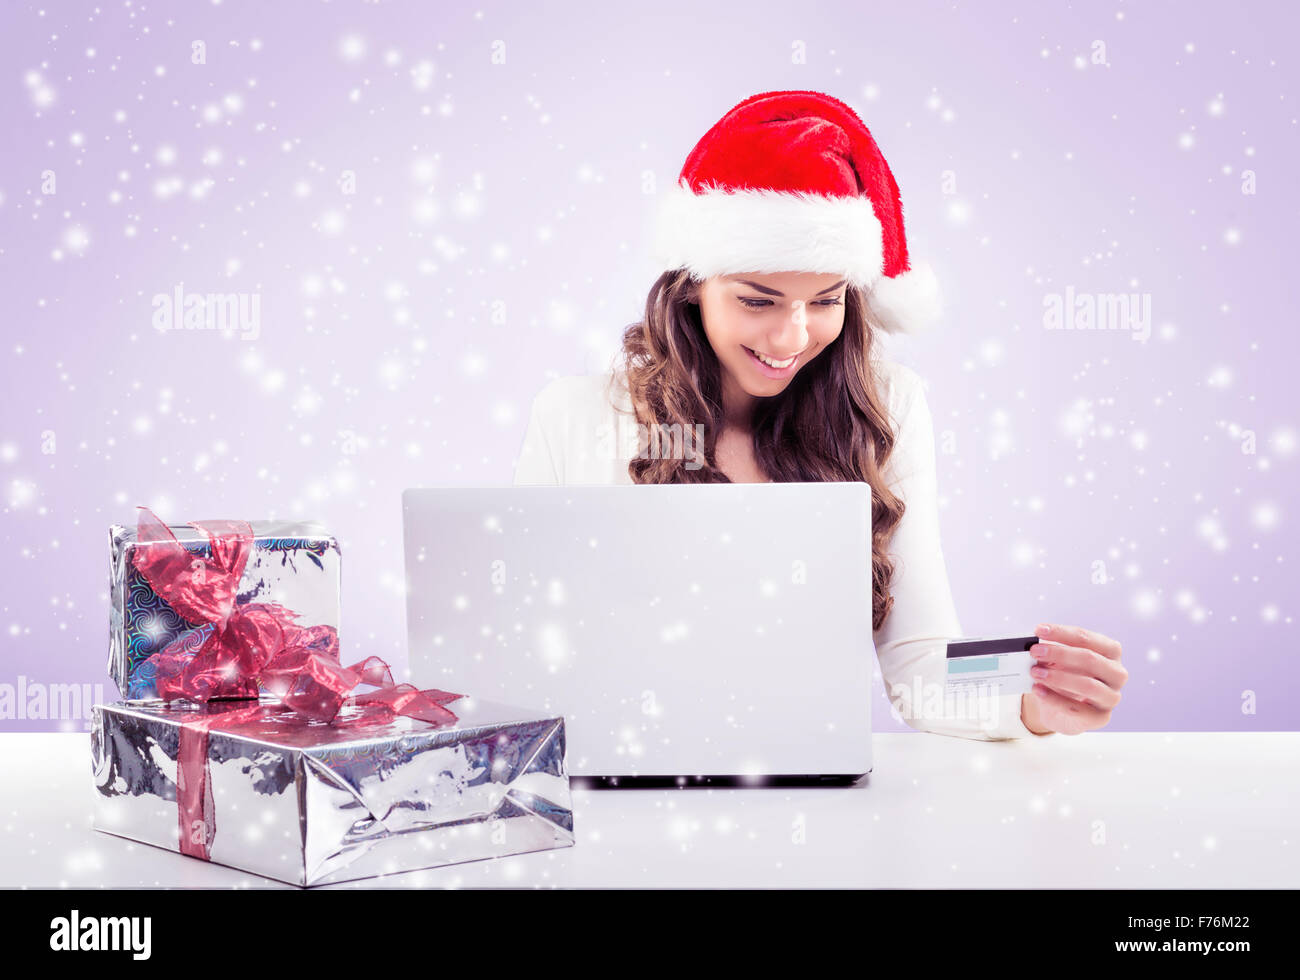 Business woman  working in Santa Claus hat Stock Photo